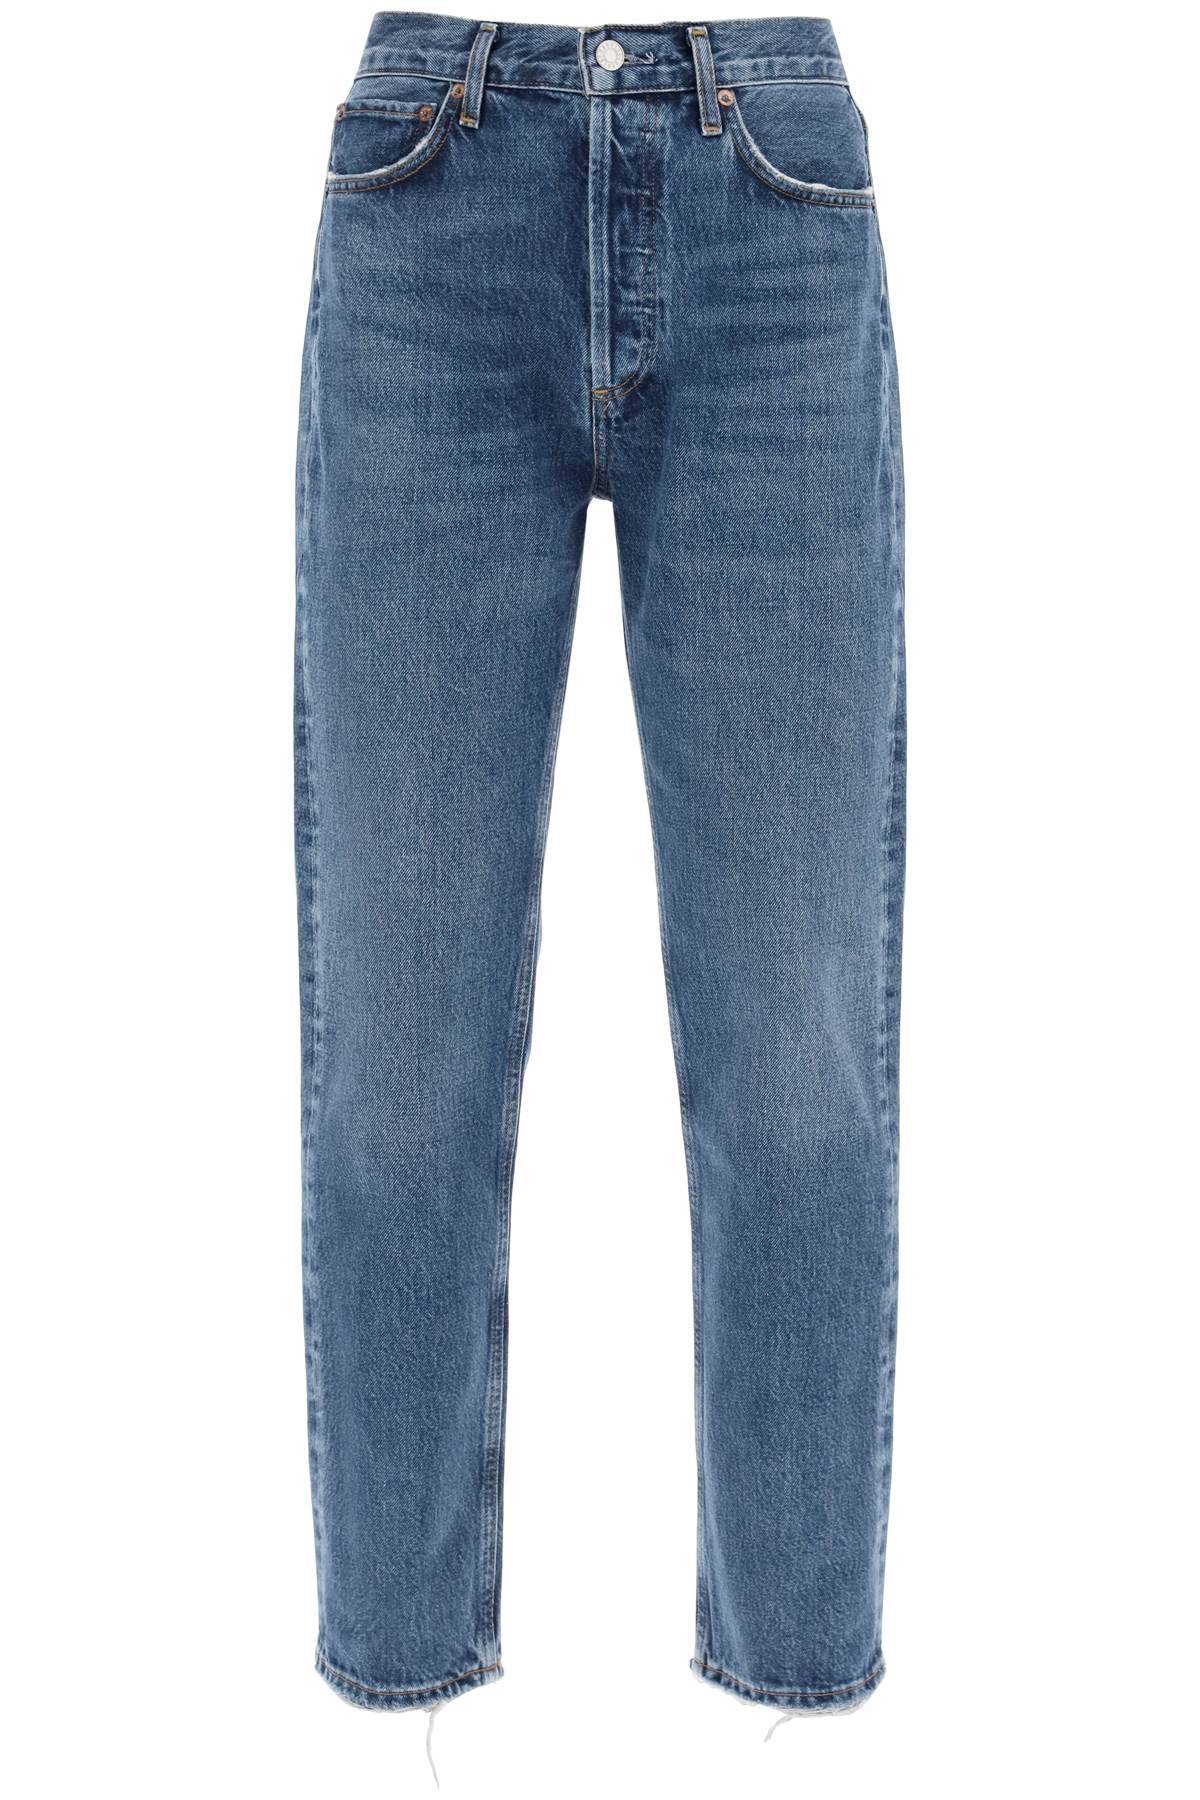 AGOLDE AGOLDE straight leg jeans from the 90's with high waist